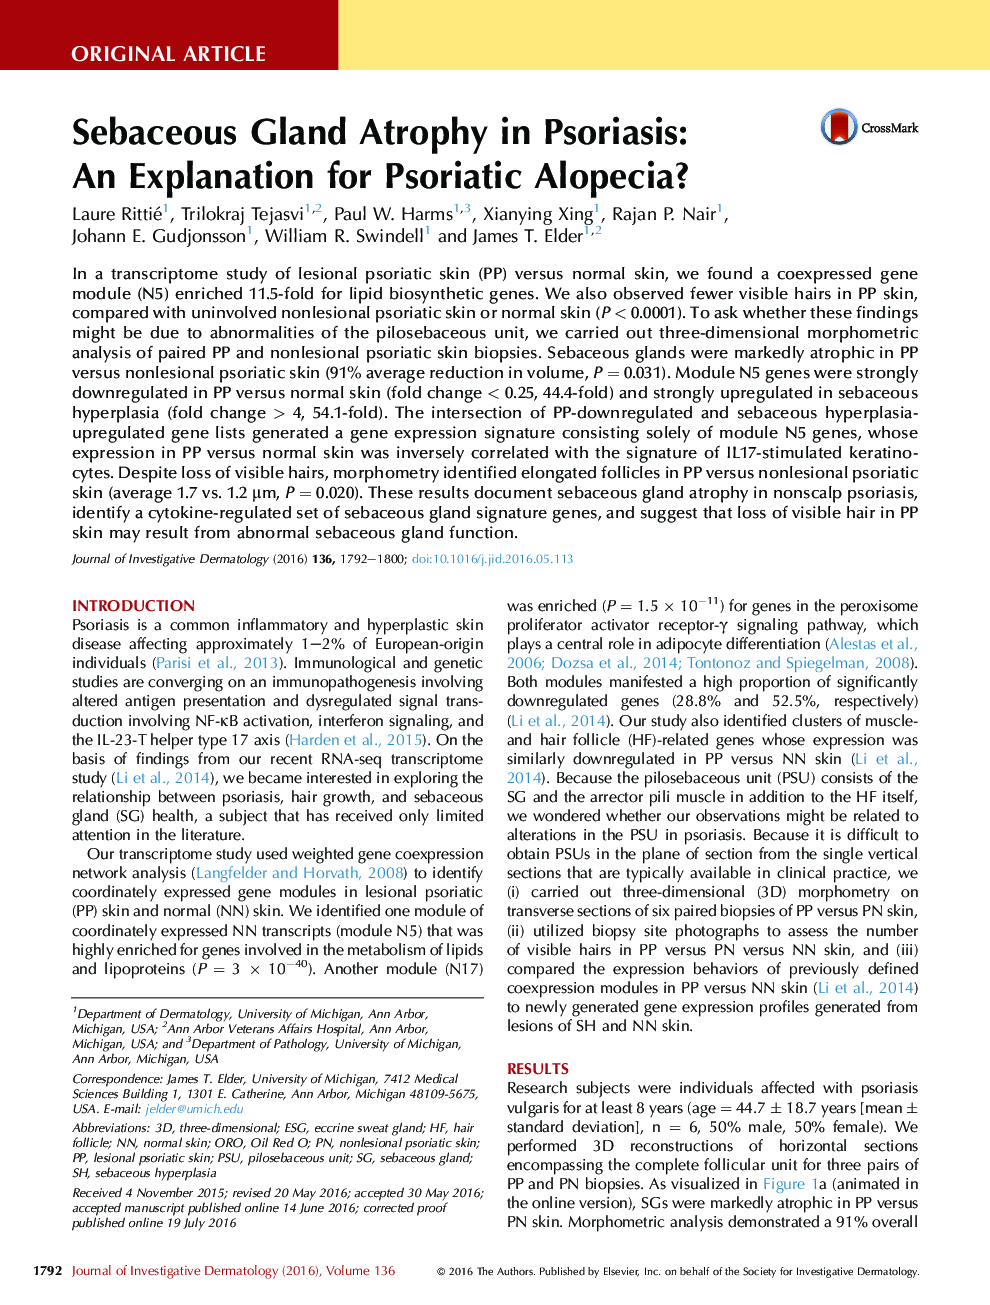 Sebaceous Gland Atrophy in Psoriasis: An Explanation for Psoriatic Alopecia?